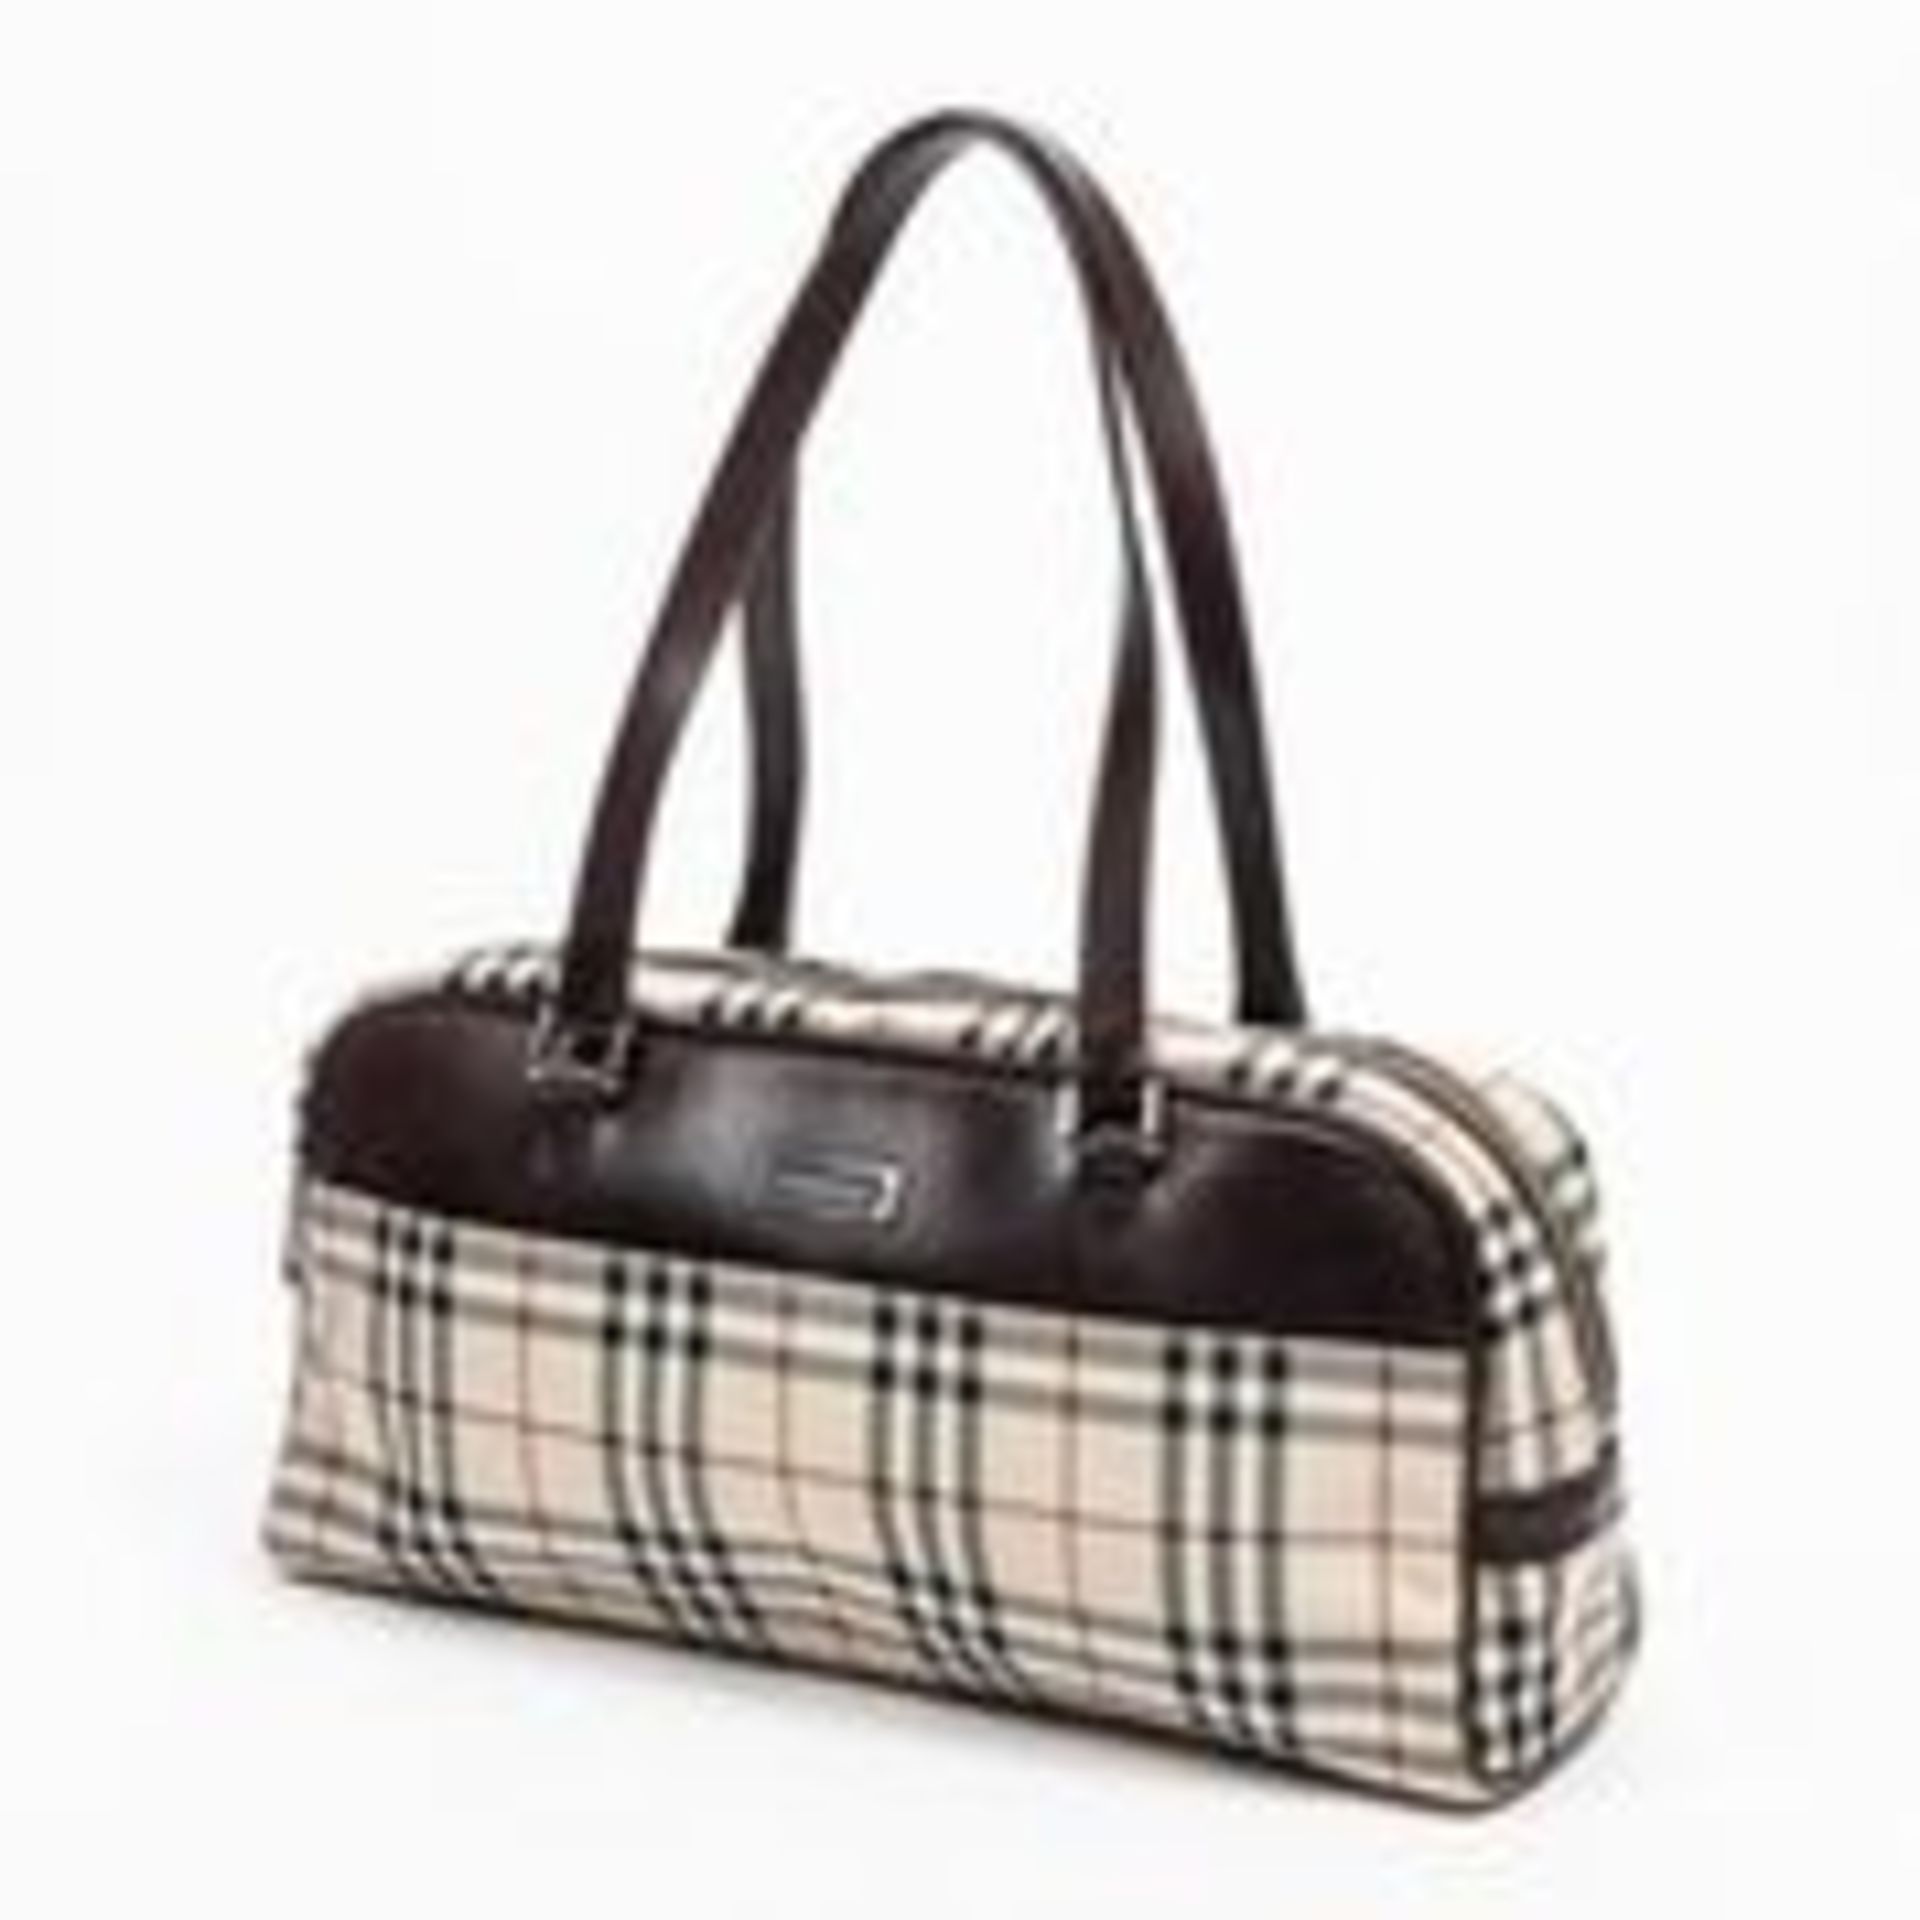 RRP £875 Burberry Shoulder Bag Beige/Dark Brown - AAQ0407 - Grade AB - Please Contact Us Directly - Image 2 of 4